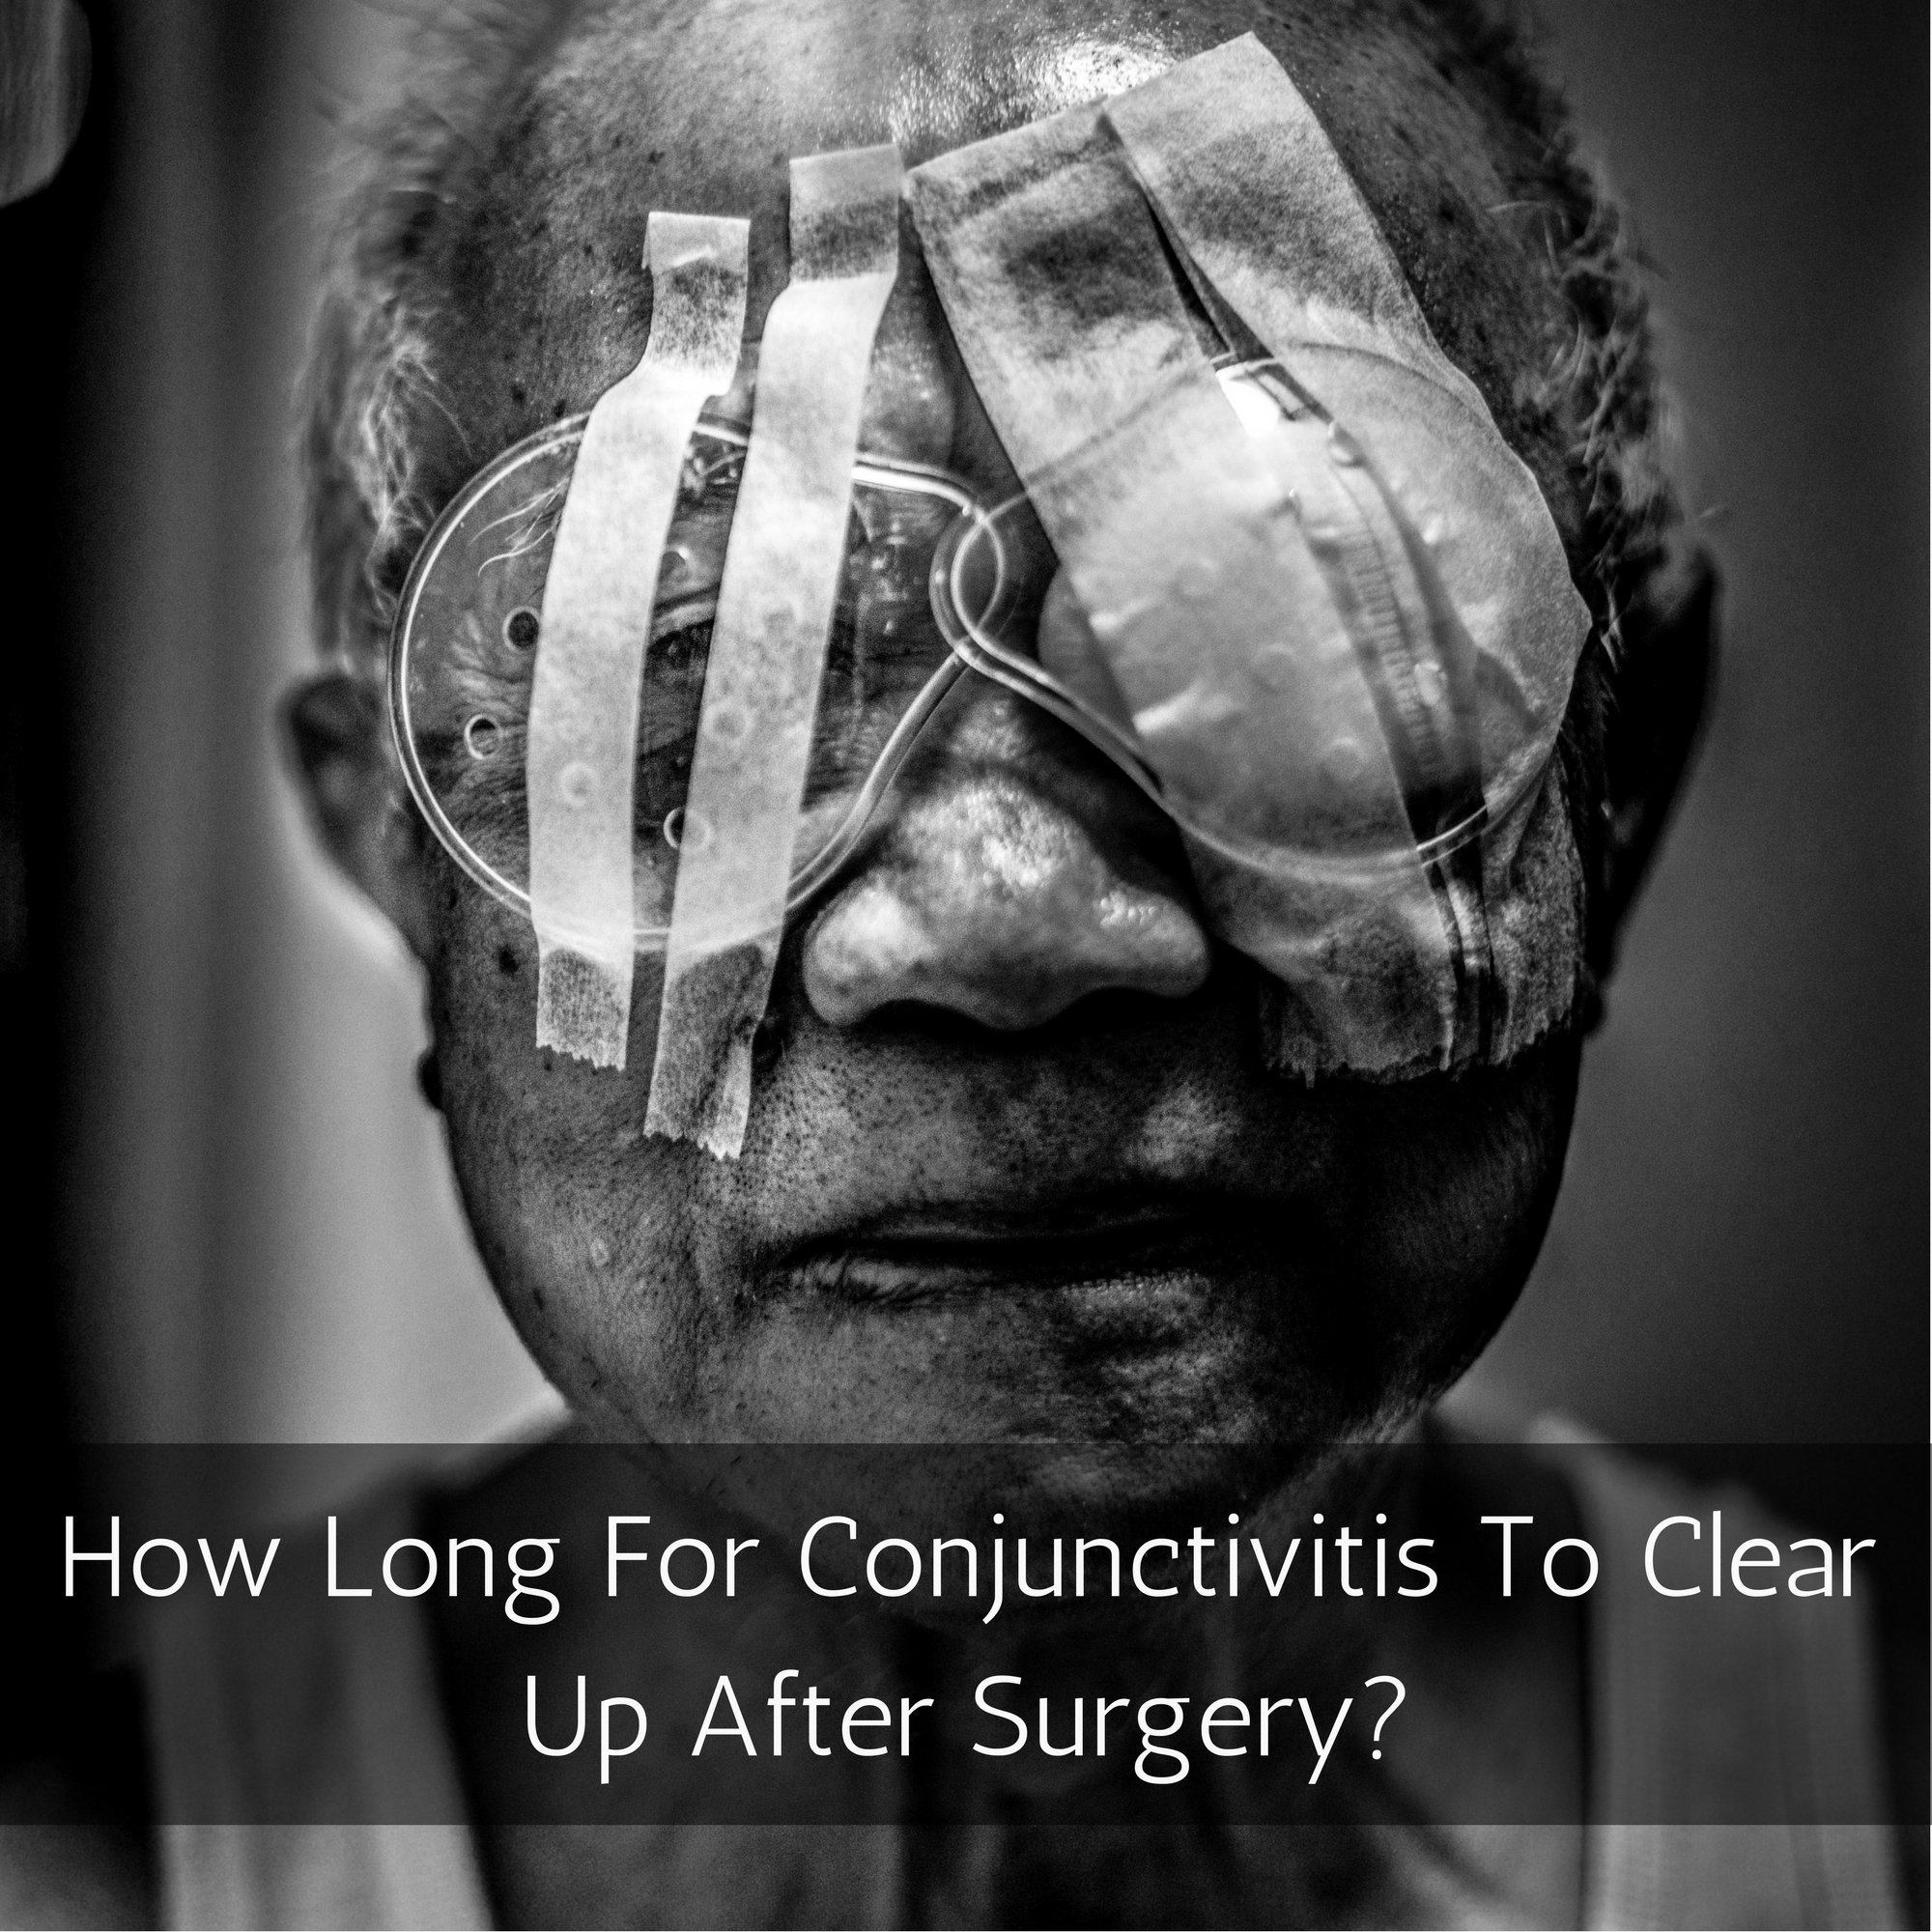 How Long for Conjunctivitis to Clear Up After Surgery?